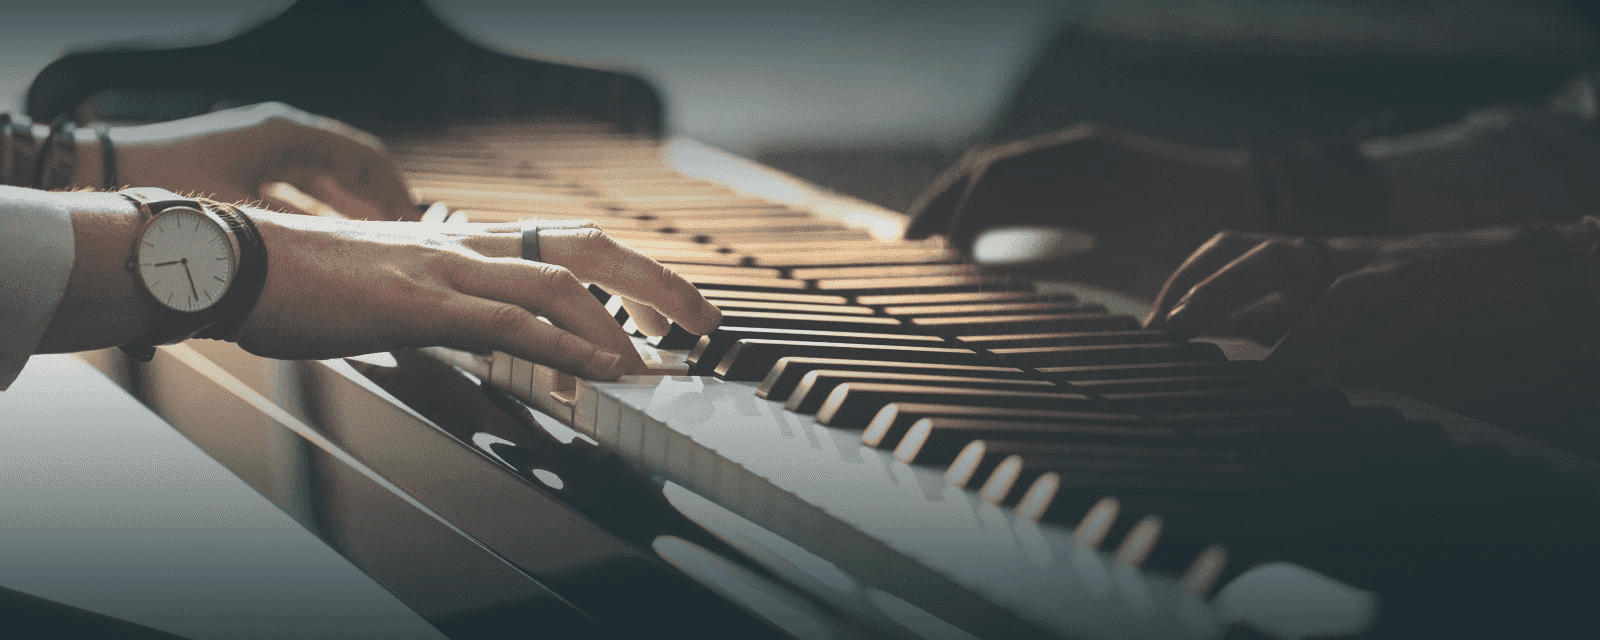 Piano course for beginners and intermediate;
Vocal - all ages and levels
Music theory and composition 